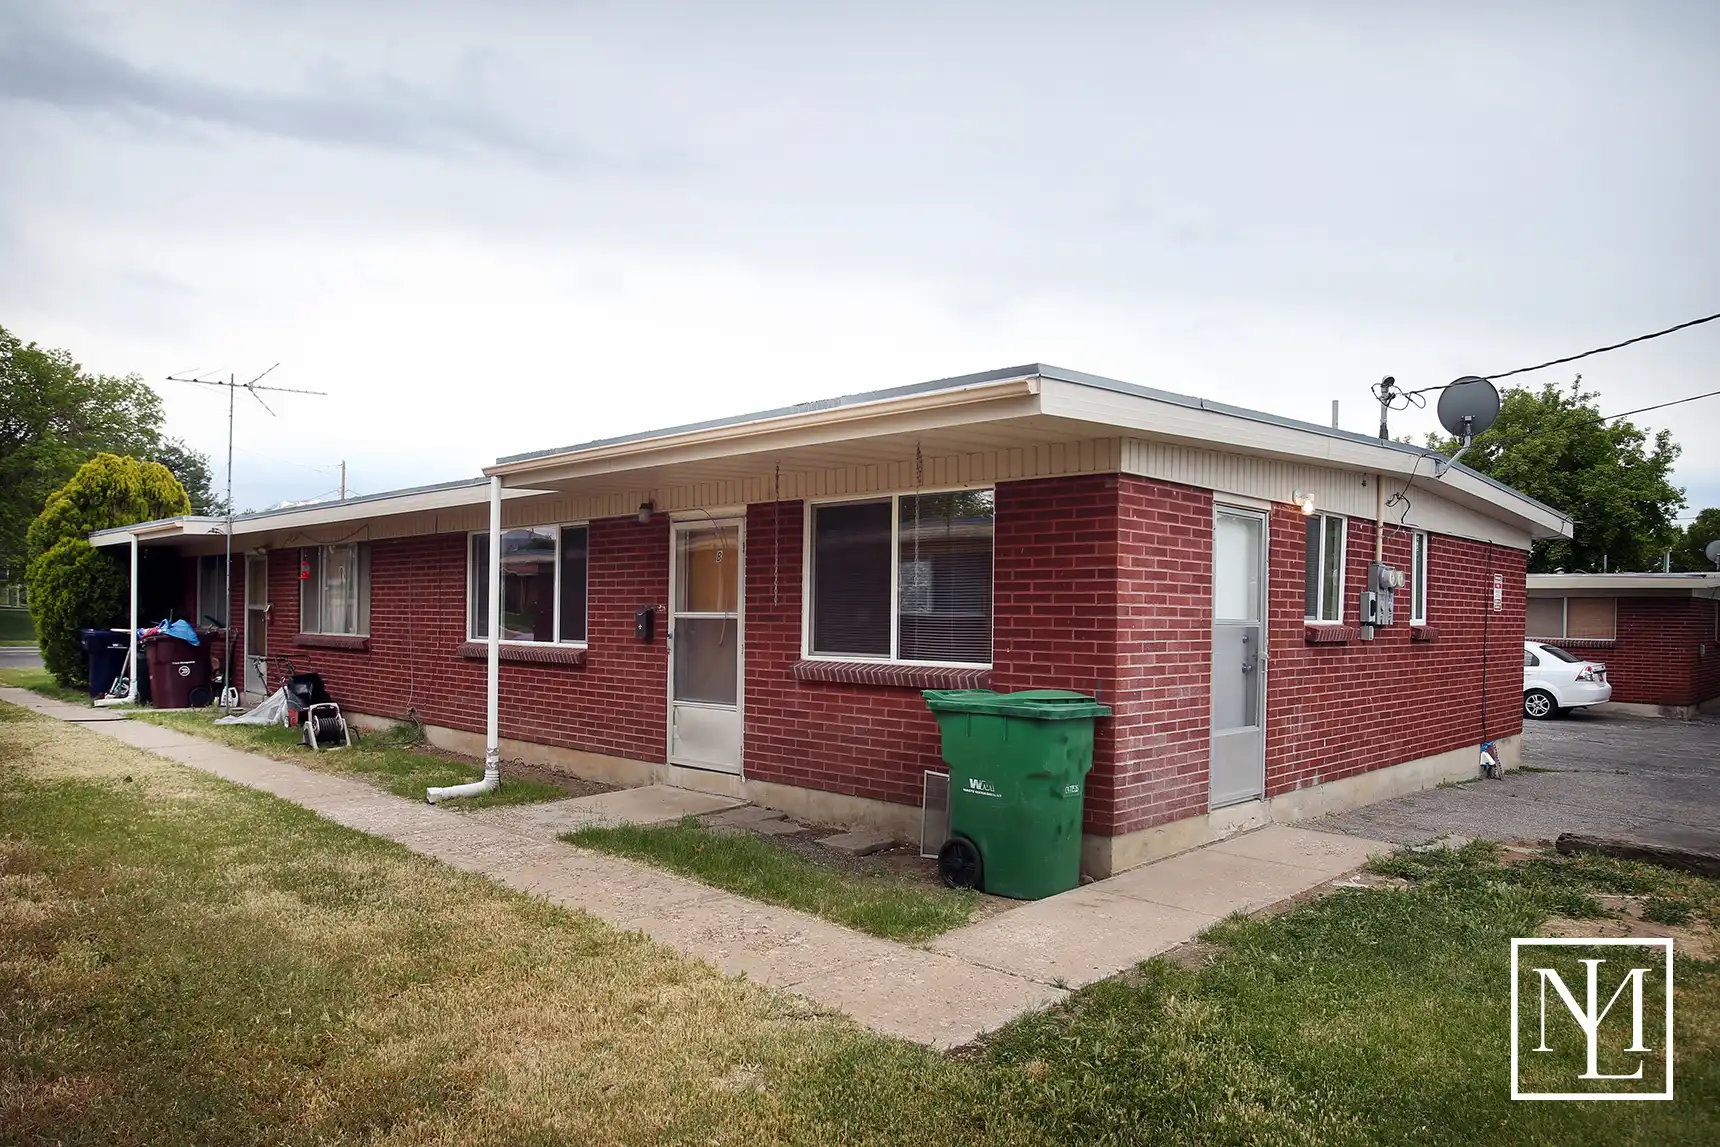 hero image for blog * SOLD * Quiet Investment Property at 5675 S. 2200 W. Roy, UT 84067